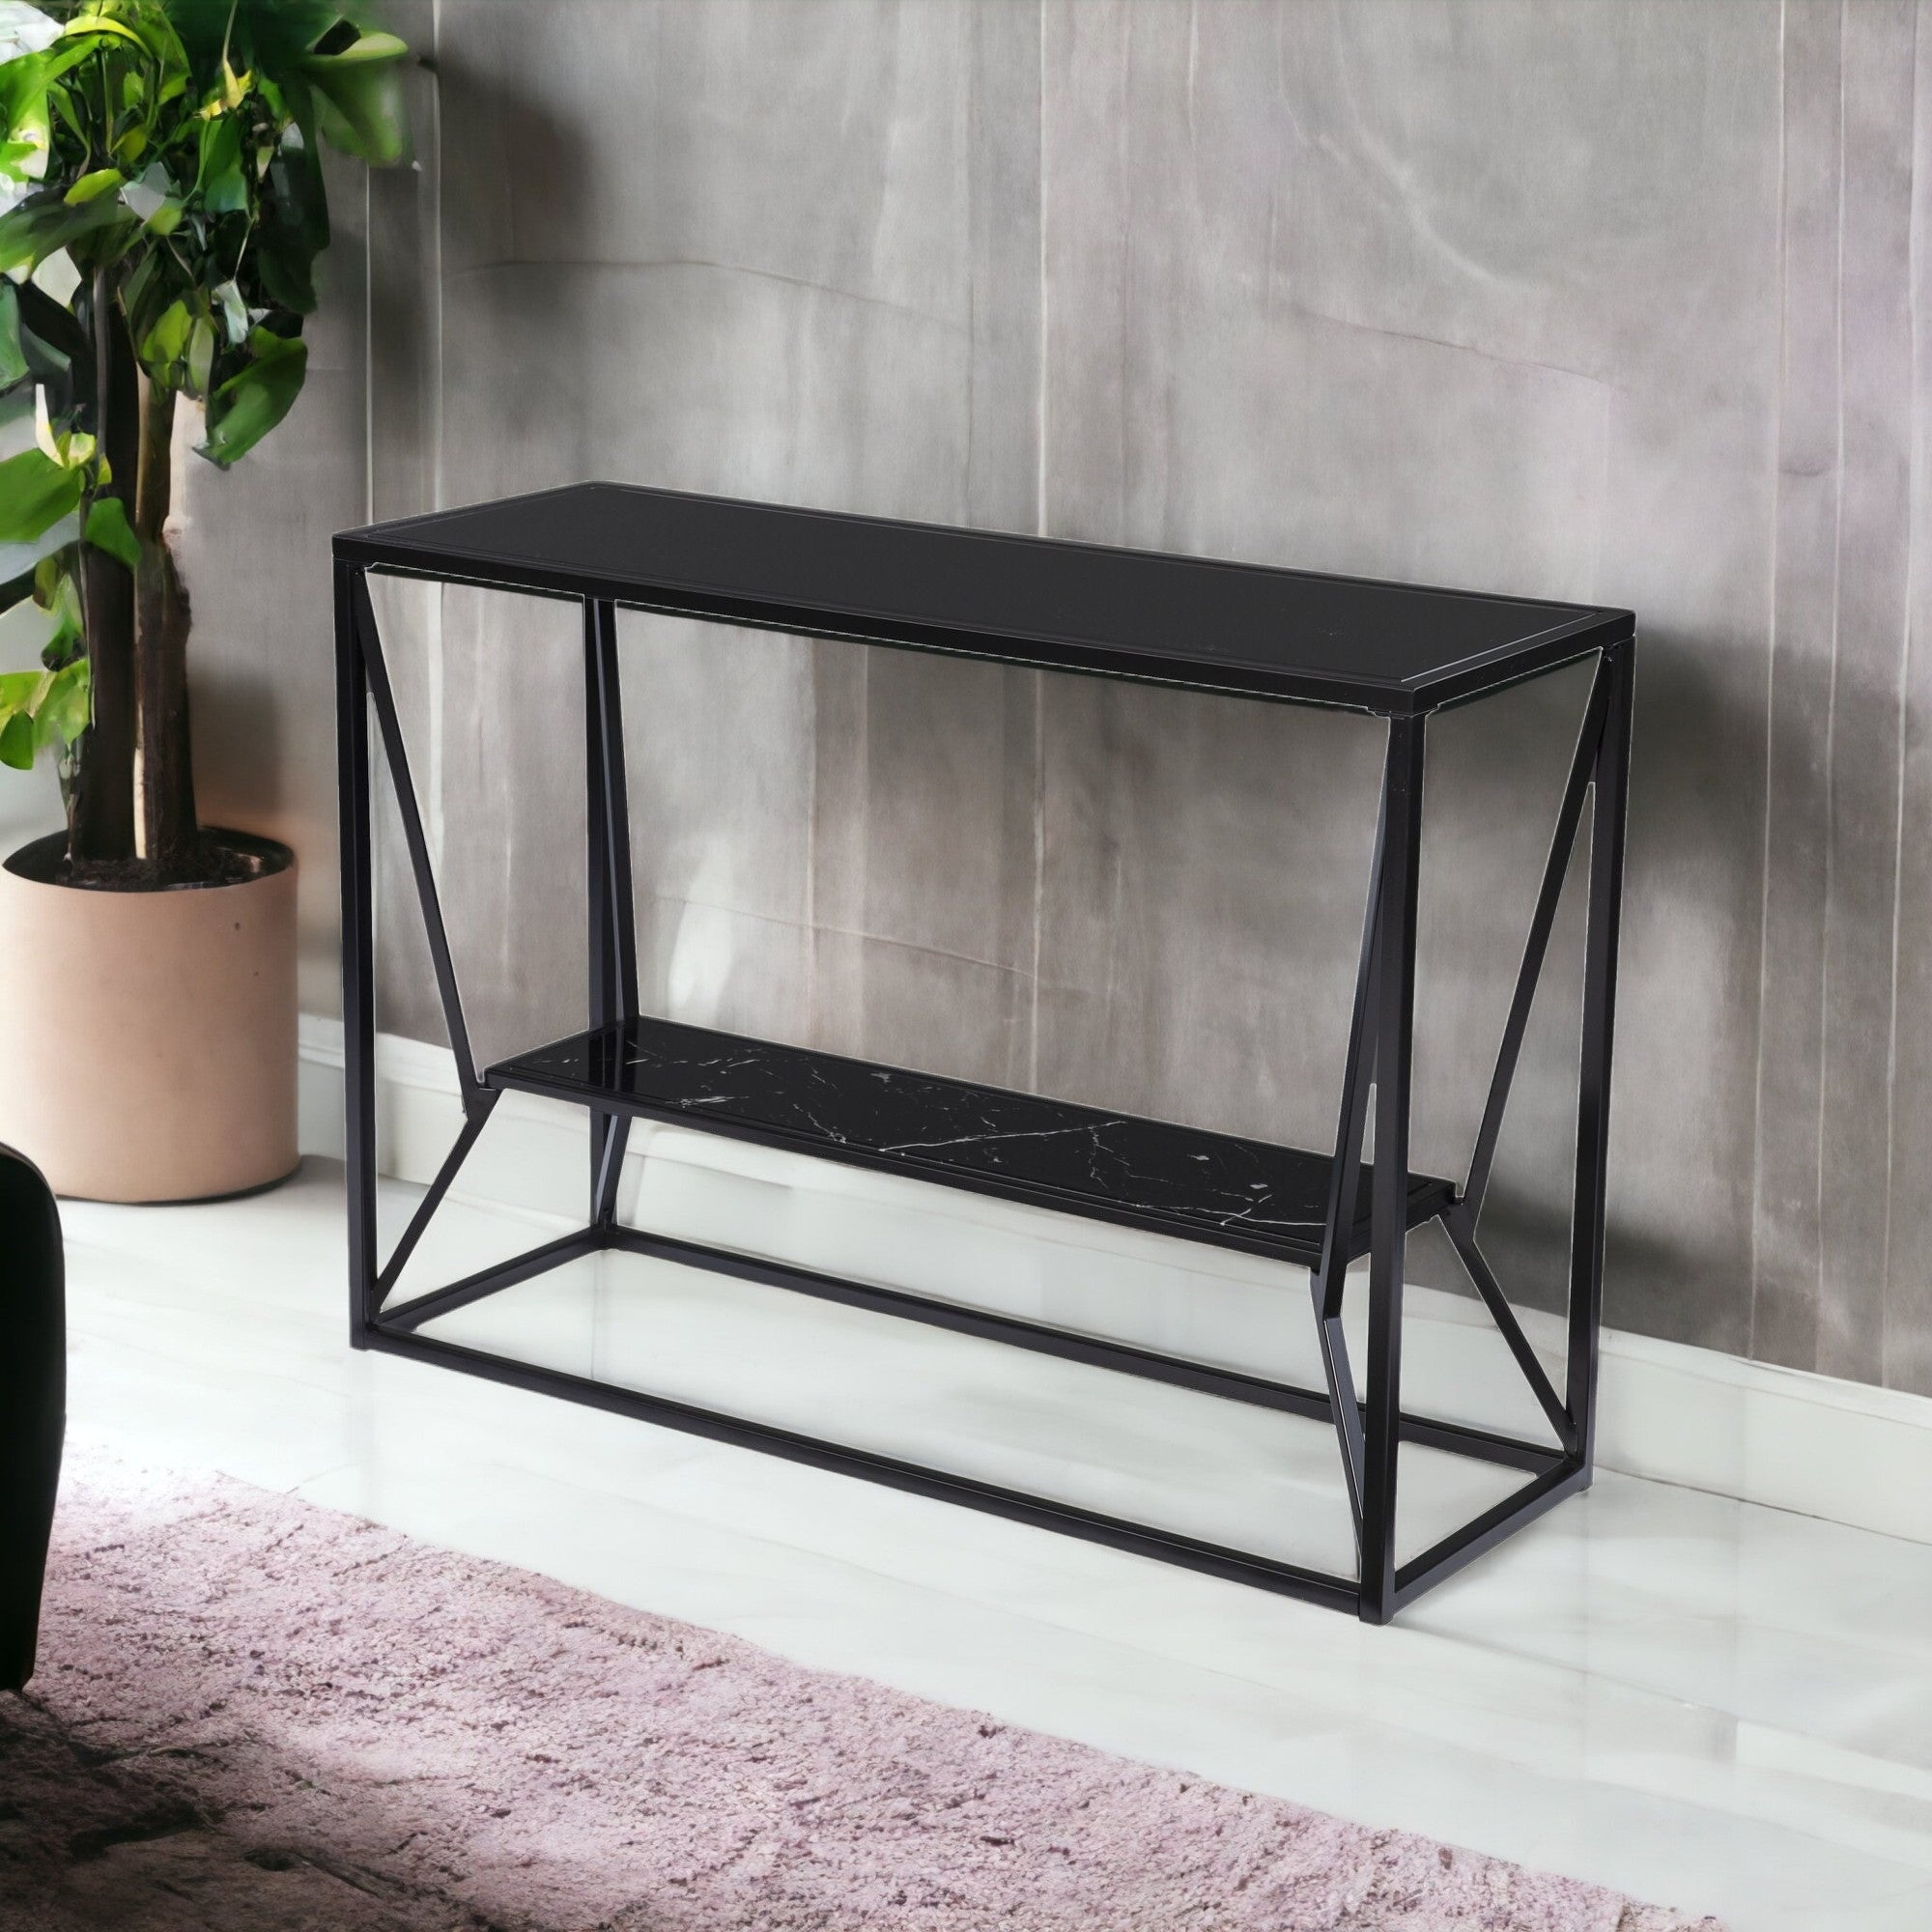 42" Black Glass Frame Console Table With Storage